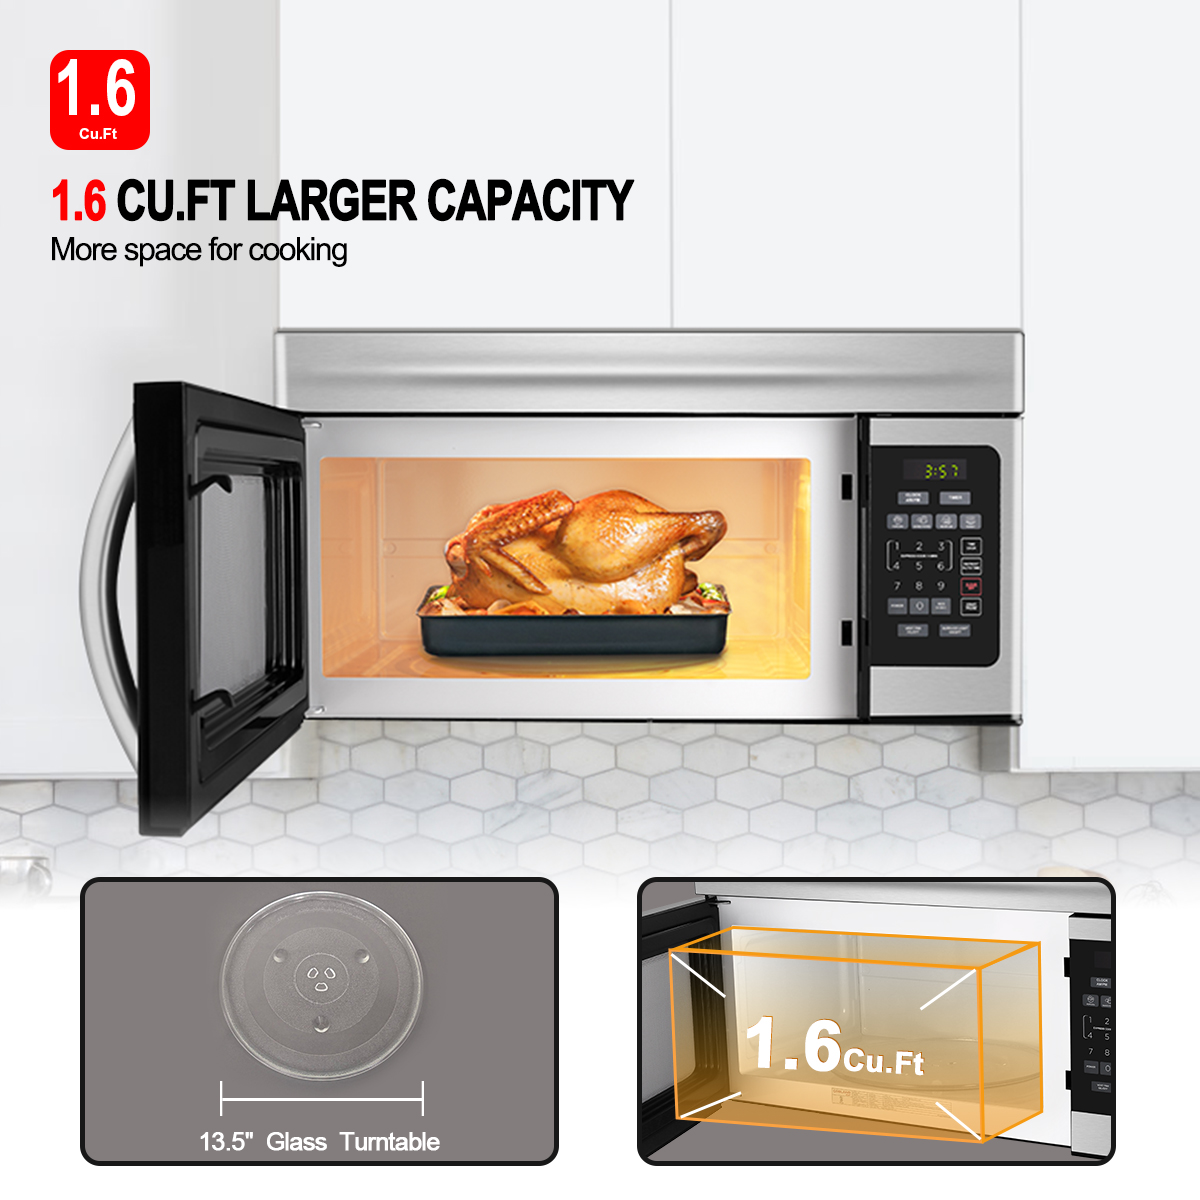 GASLAND Chef 30" over-the-Range Microwave Oven 1.6 cu.ft., 300 CFM in Stainless Steel - image 3 of 7